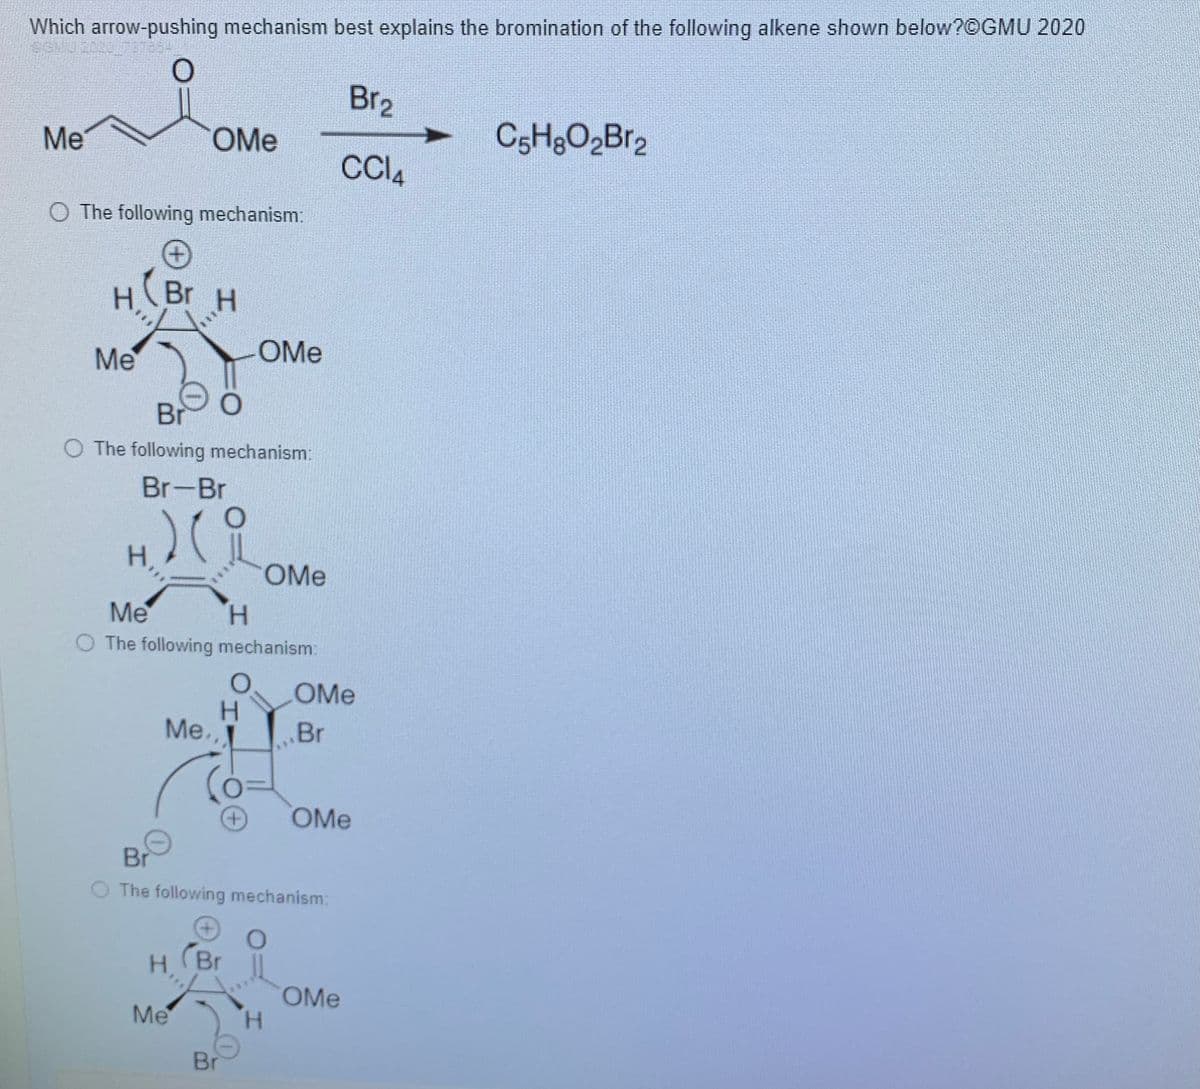 Which arrow-pushing mechanism best explains the bromination of the following alkene shown below?©GMU 2020
Br2
Me
OMe
CC4
O The following mechanism:
H(Br
Br H
Me
OMe
Br
O The following mechanism:
Br-Br
H.
OMe
Me
H.
O The following mechanism:
OMe
H.
Me.
.Br
***
OMe
Br
O The following mechanism:
(Br
H.
OMe
H.
Me
Br
